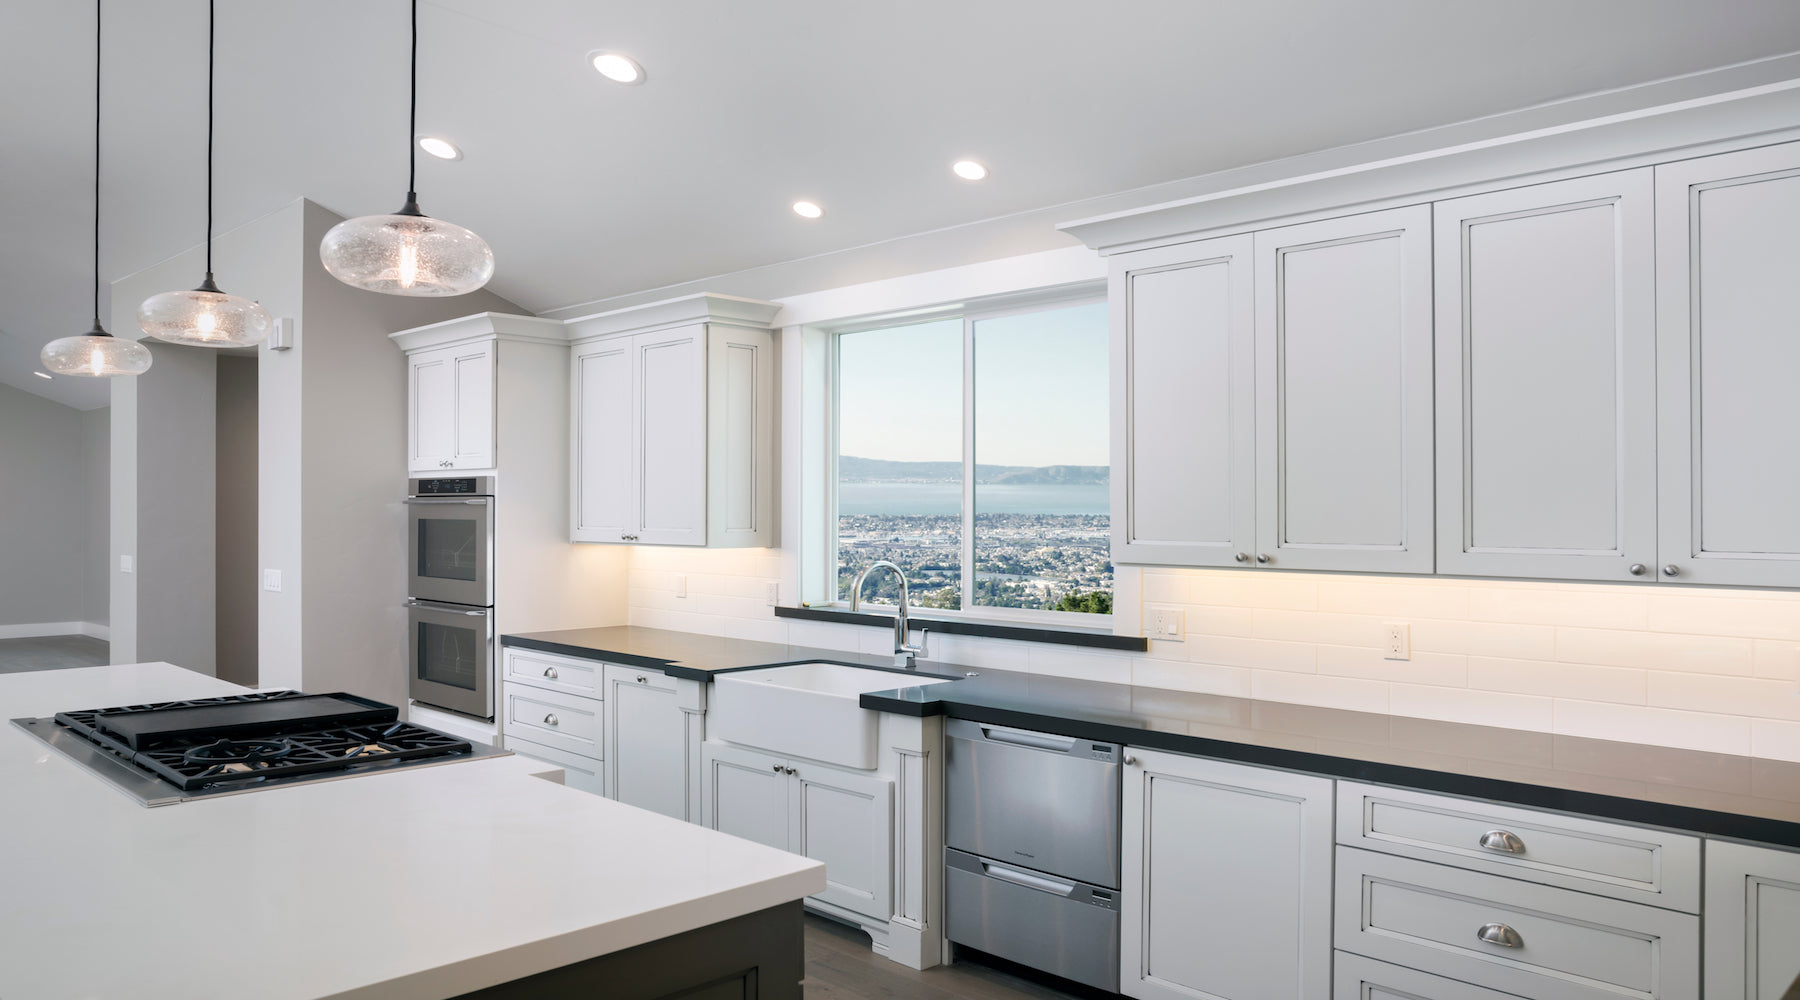 Recessed lighting installed in contemporary style kitchen